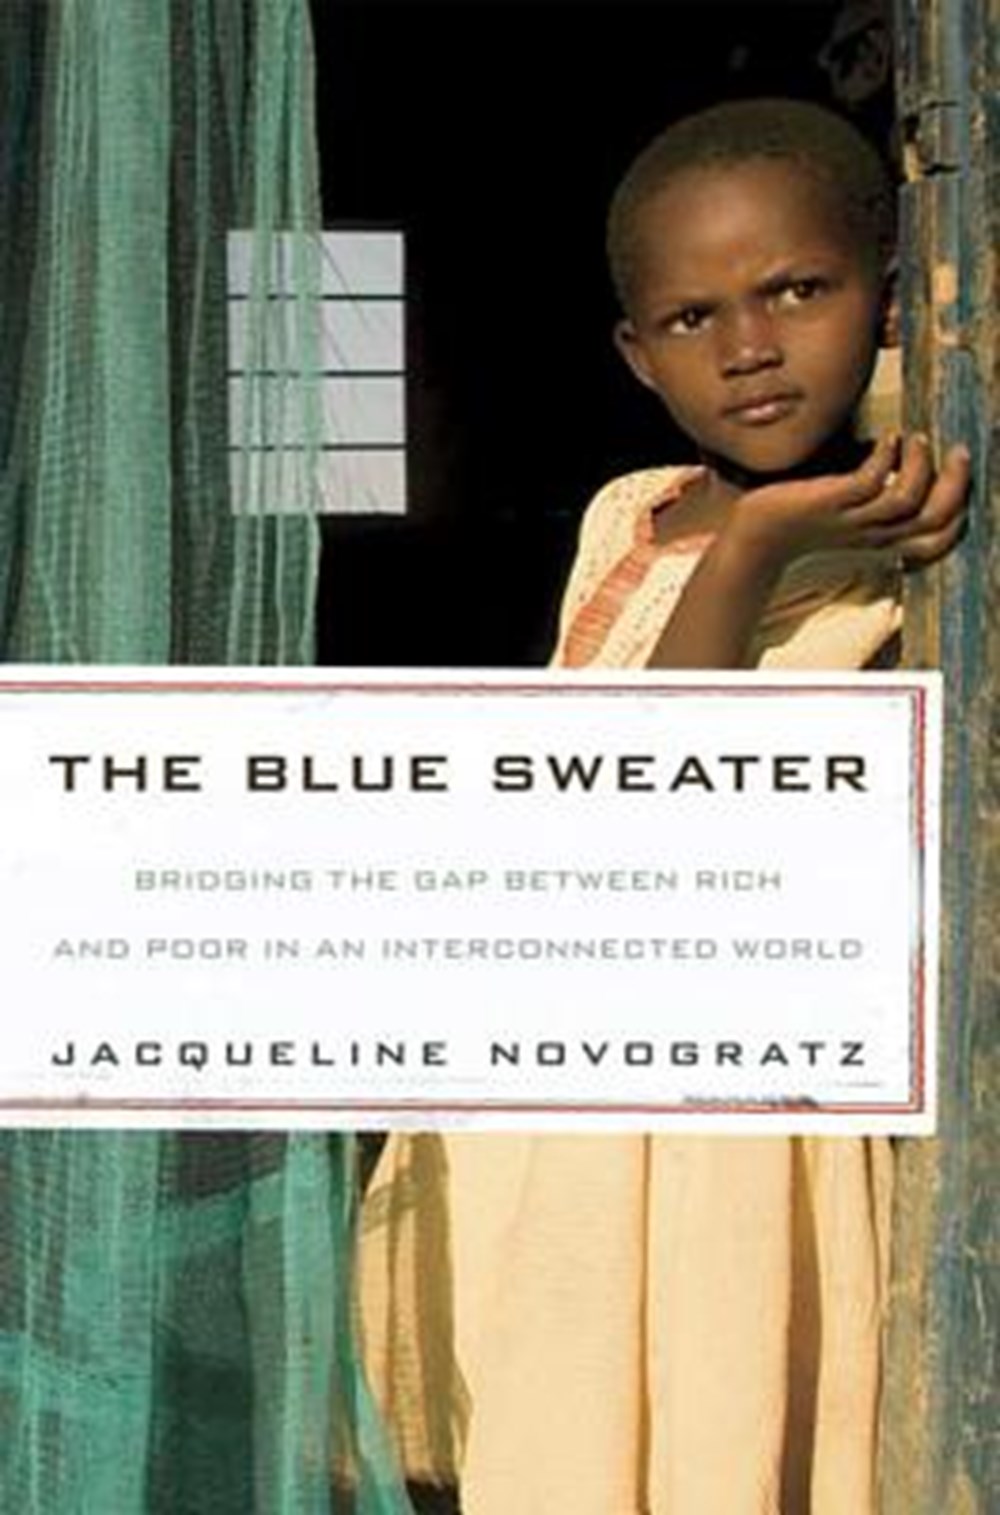 Blue Sweater Bridging the Gap Between Rich and Poor in an Interconnected World